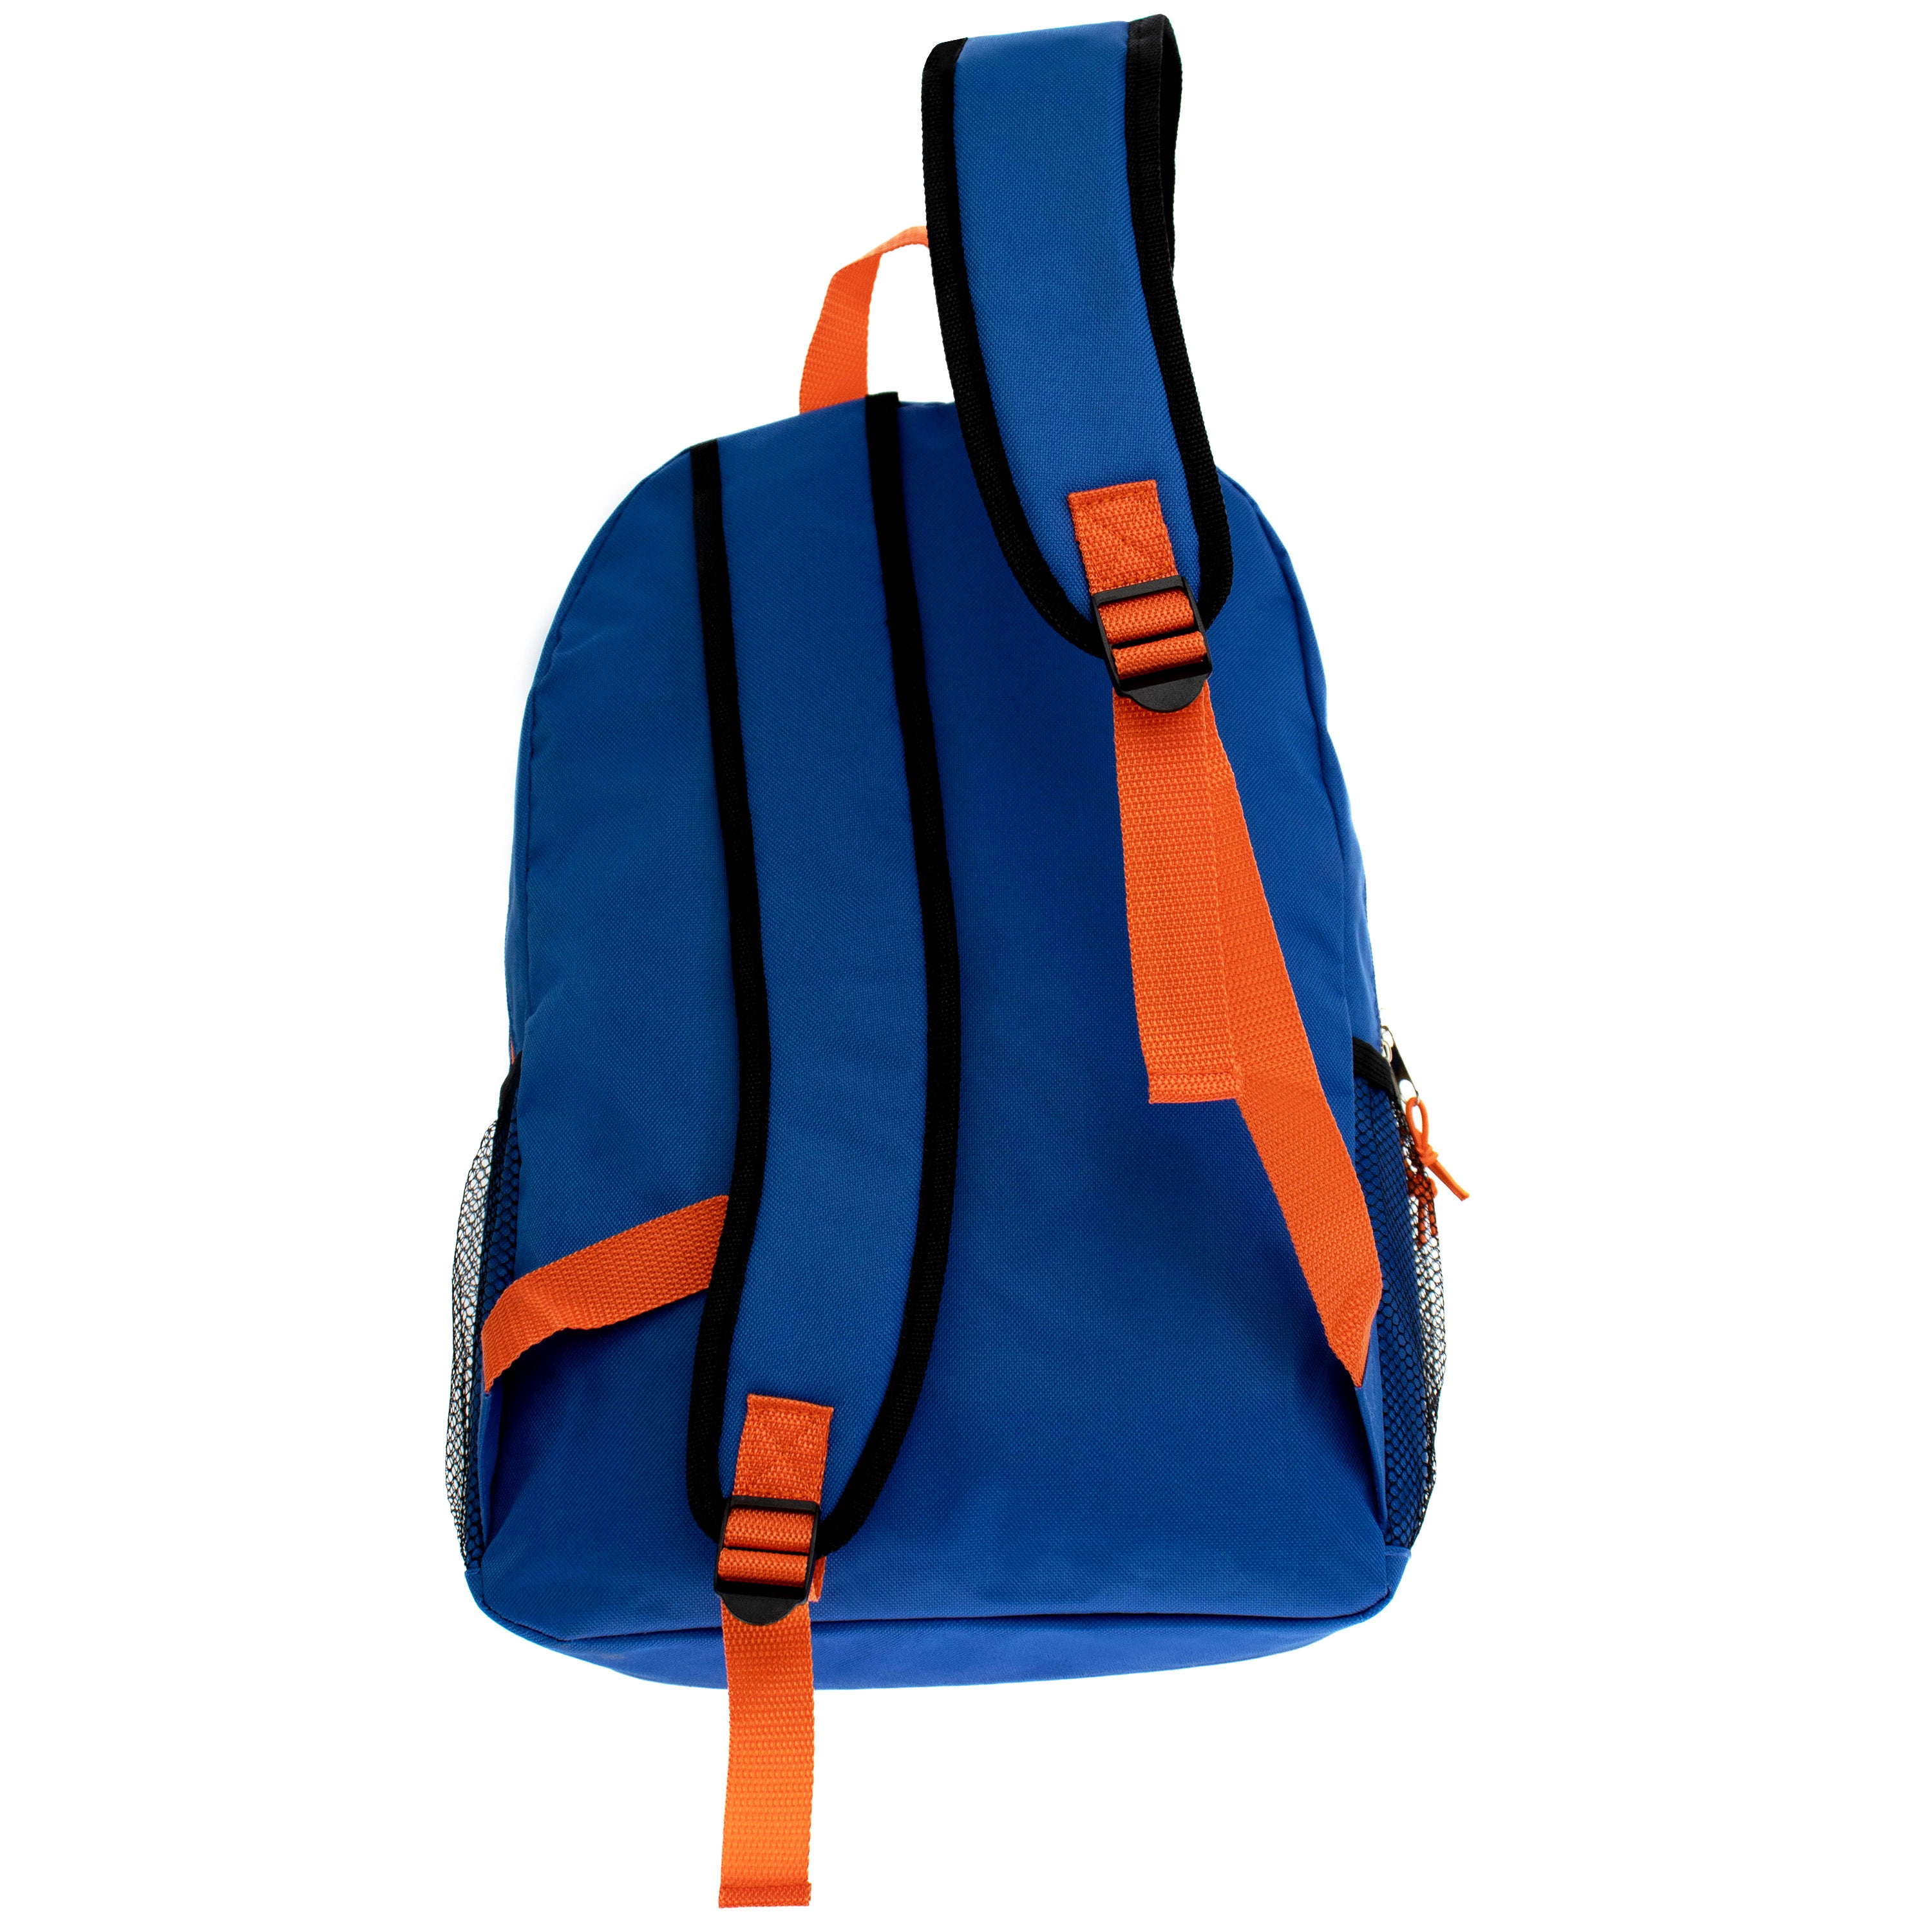 17" Bungee Wholesale Backpack in 8 Assorted Colors - Bulk Case of 24